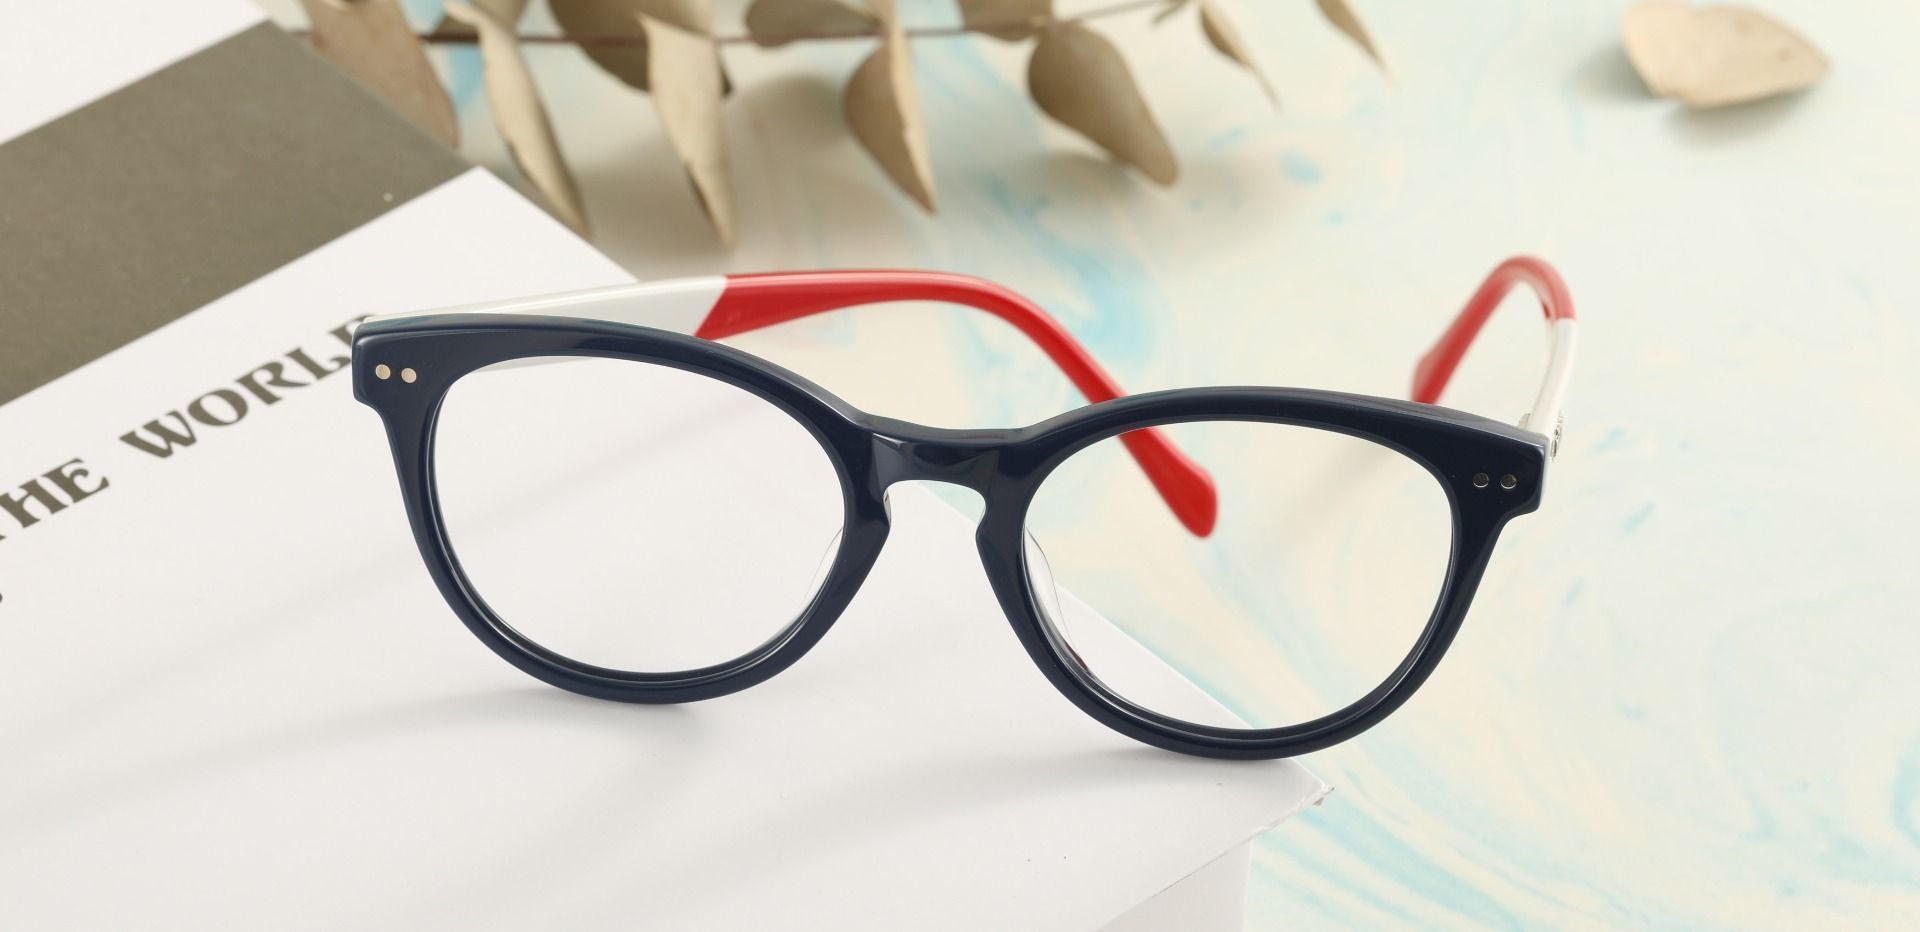 Revere Oval Eyeglasses Frame - The Frame Is Blue And Red